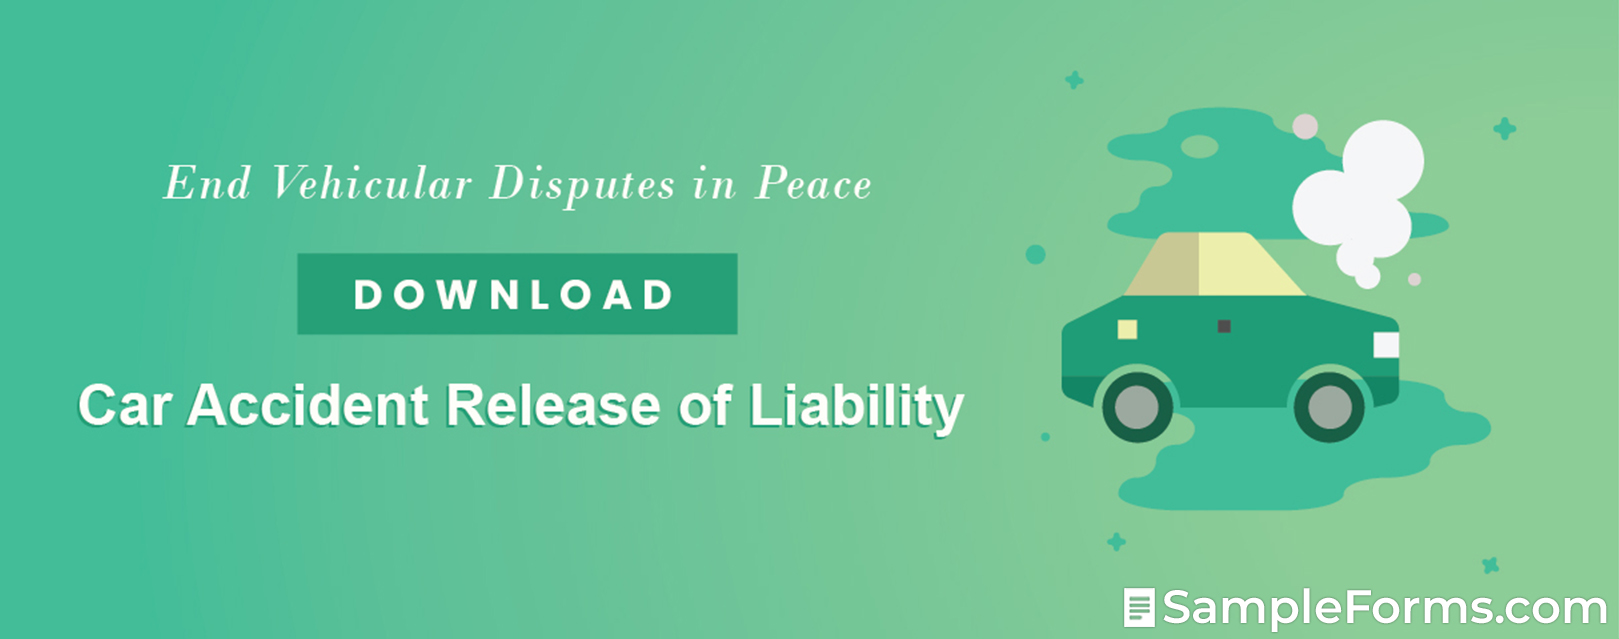 Car Accident Release of Liability